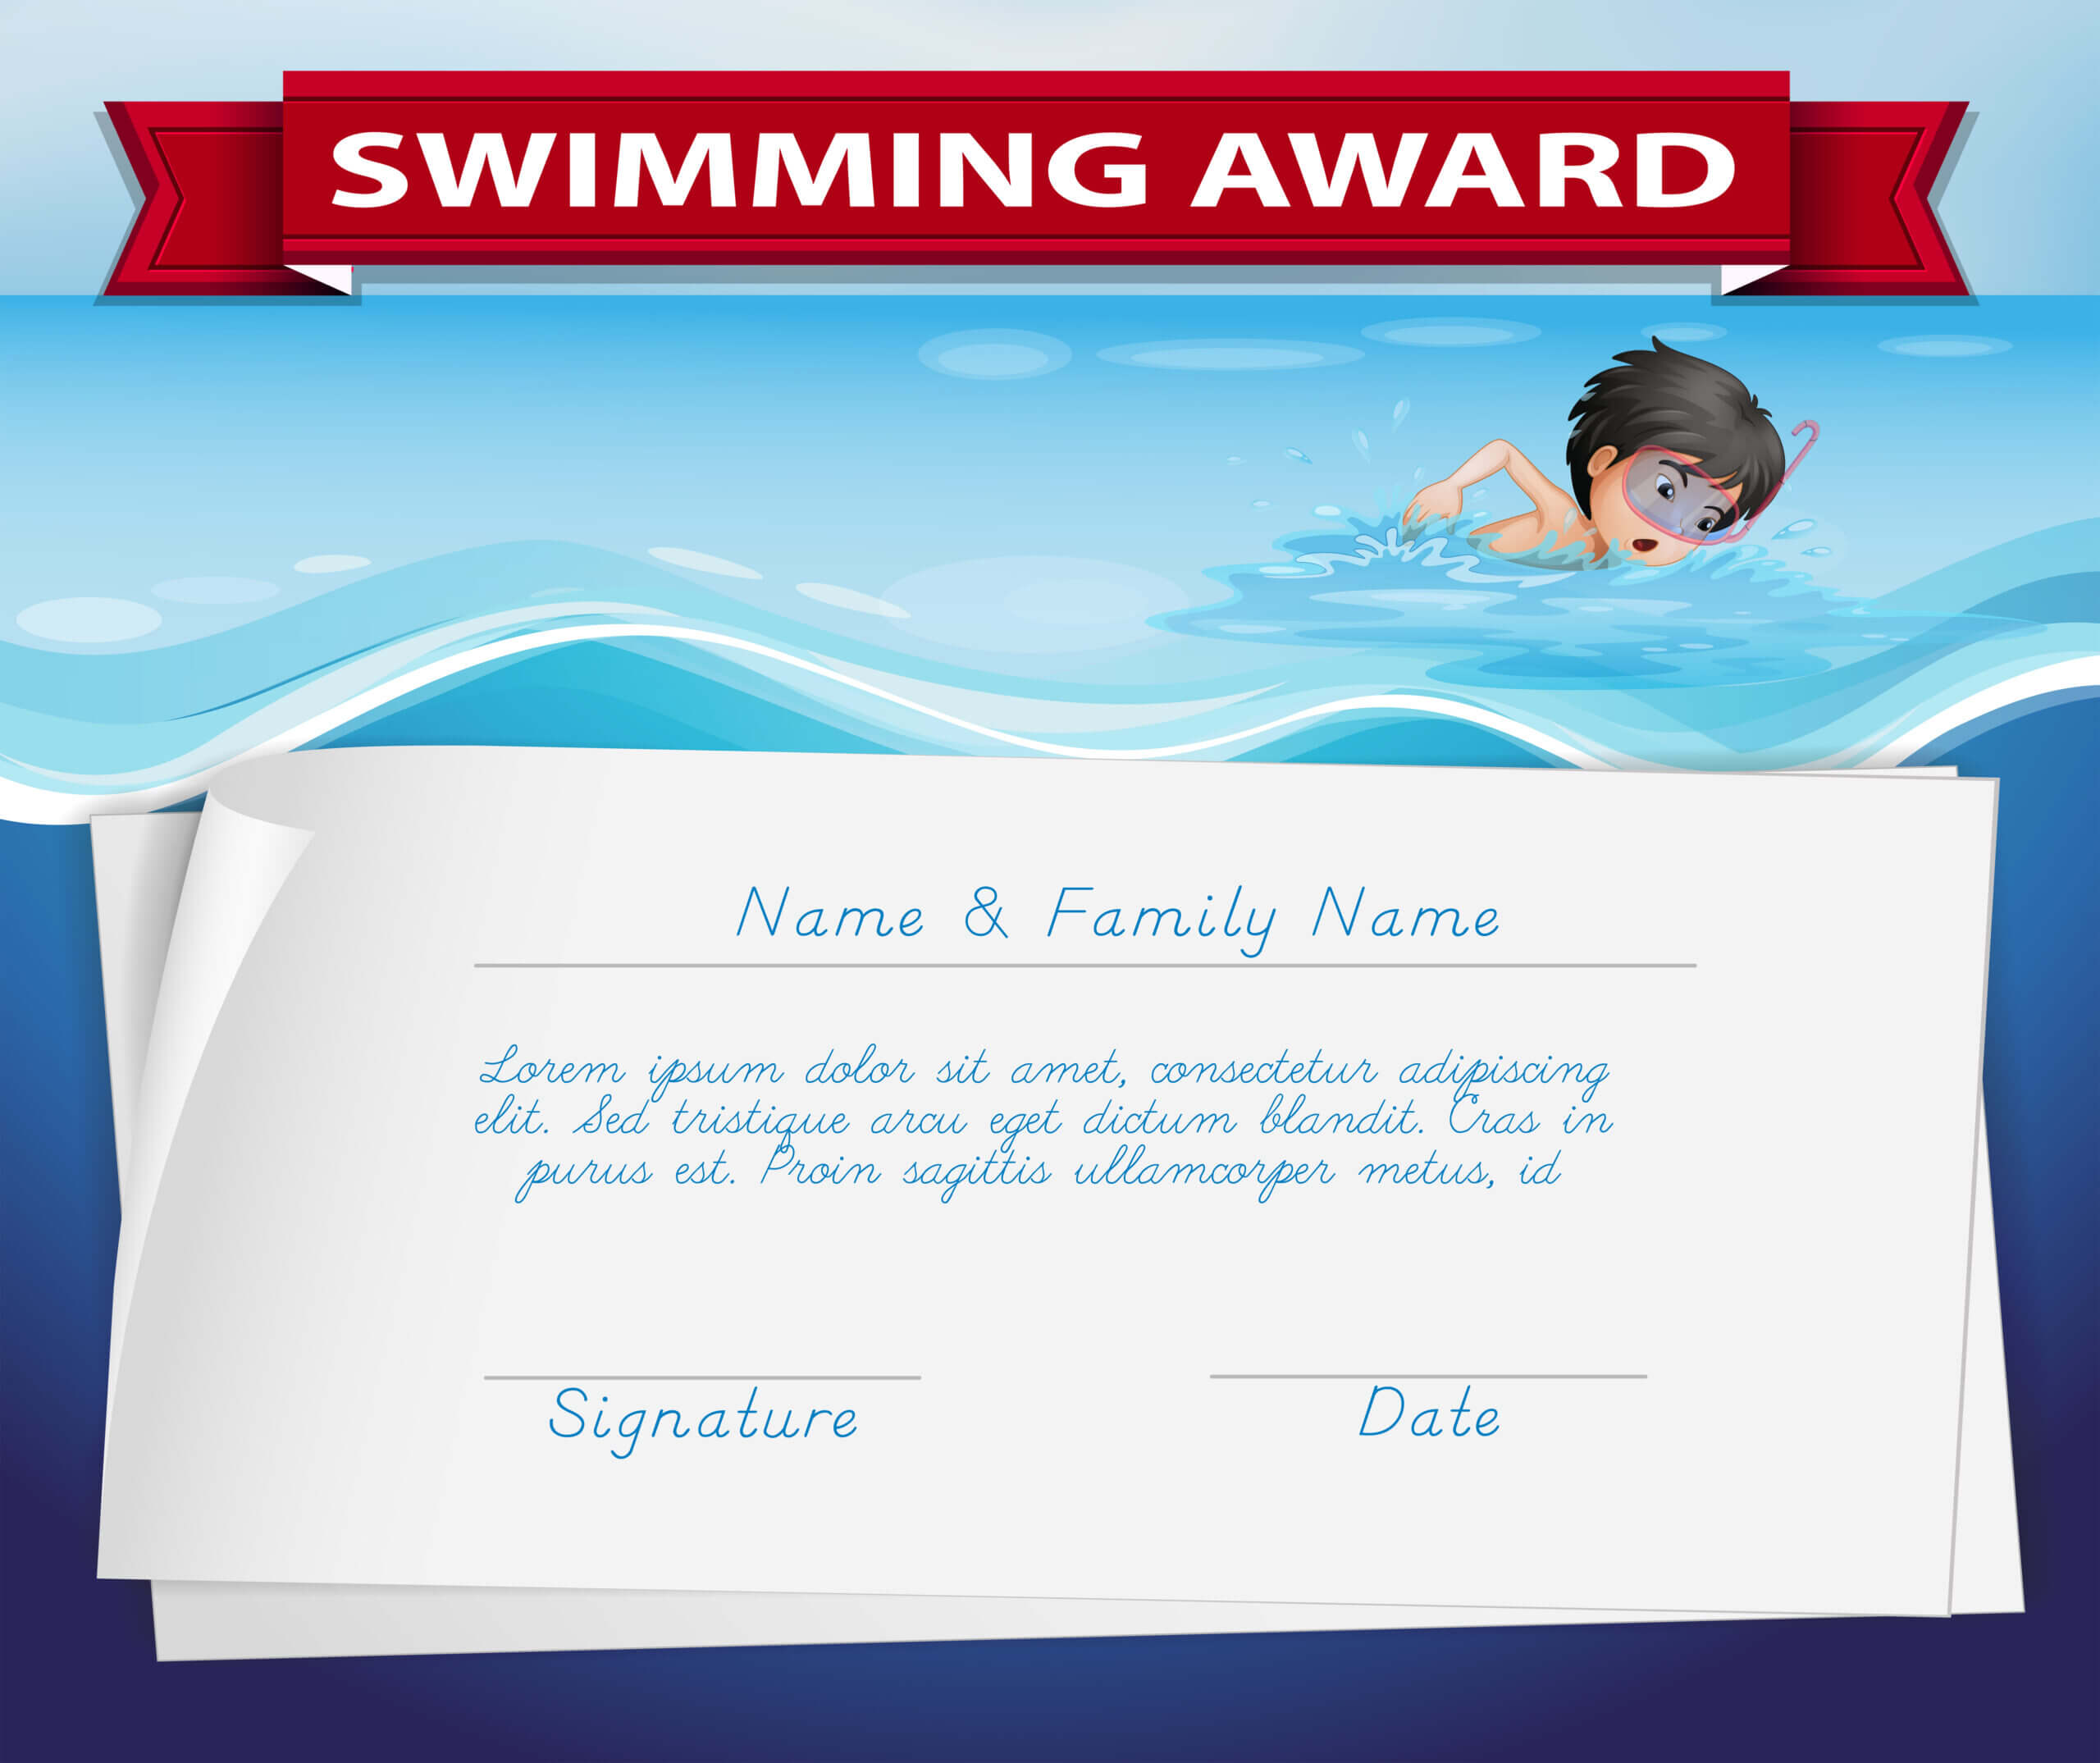 Template Of Certificate For Swimming Award – Download Free Pertaining To Swimming Certificate Templates Free